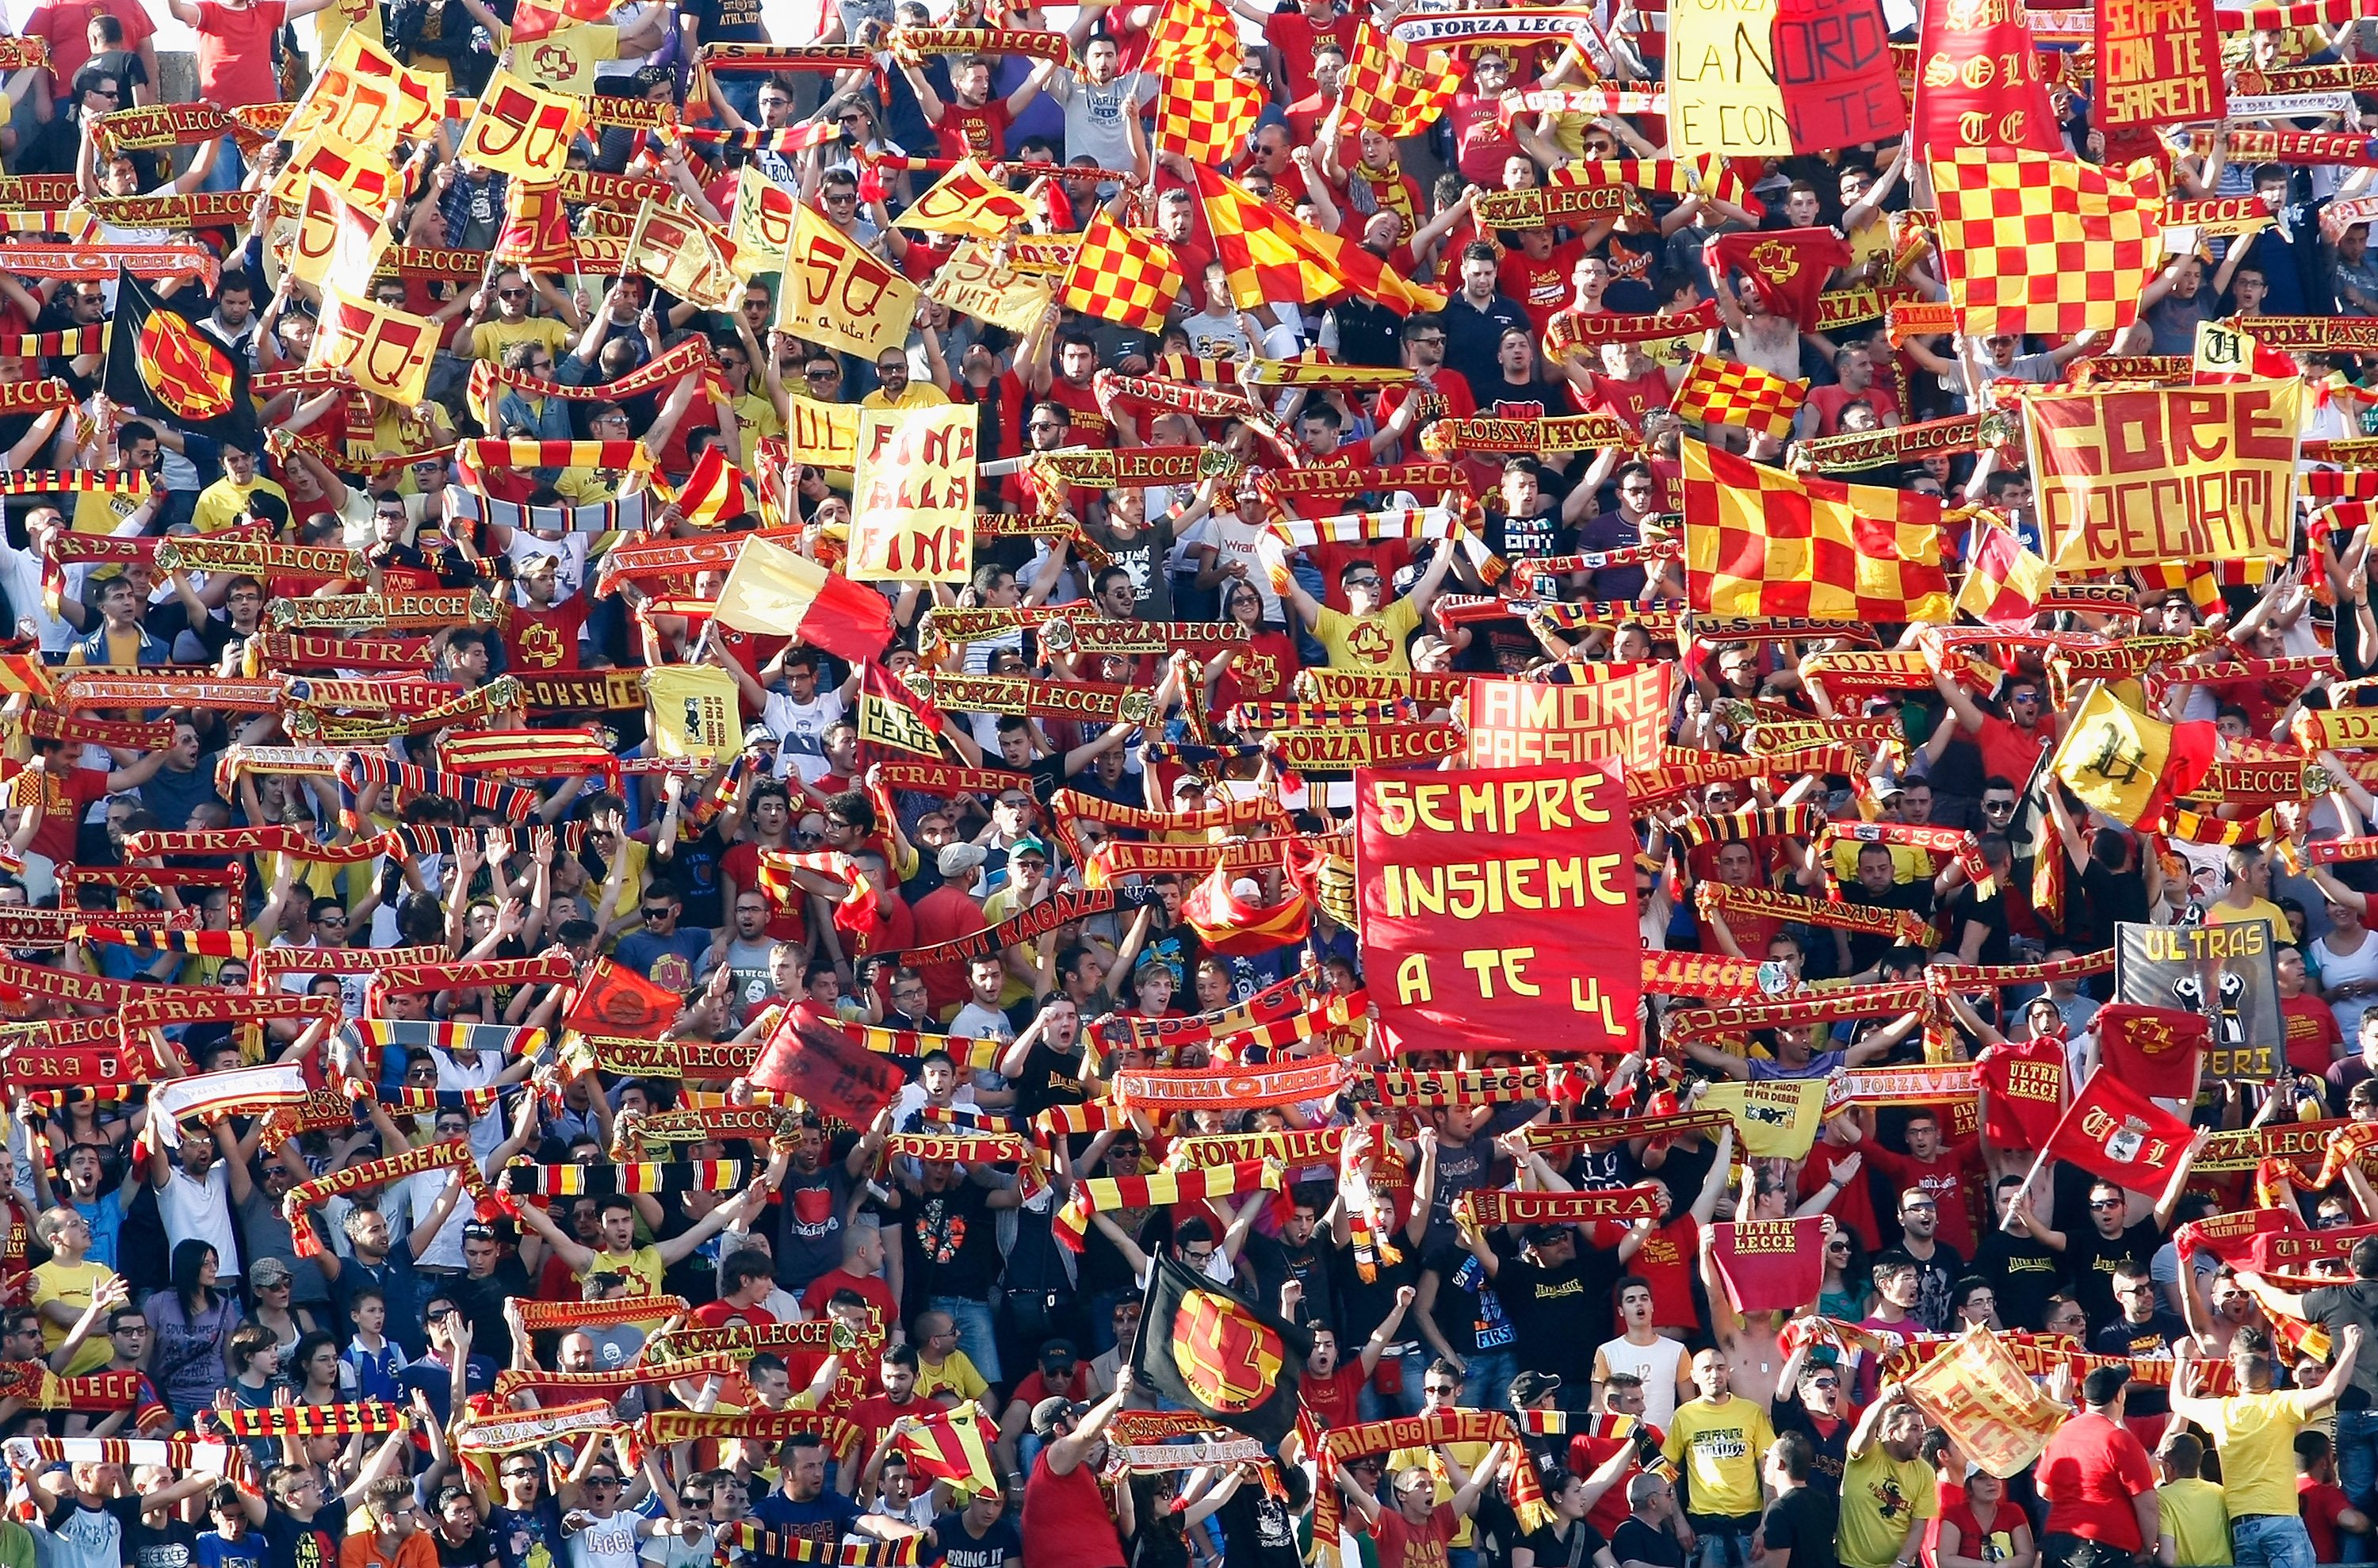 LECCE, ITALY - MAY 05:  US Lecce fans during the Serie A match between US Lecce and ACF Fiorentina at Stadio Via del Mare on May 5, 2012 in Lecce, Italy.  (Photo by Maurizio Lagana/Getty Images)